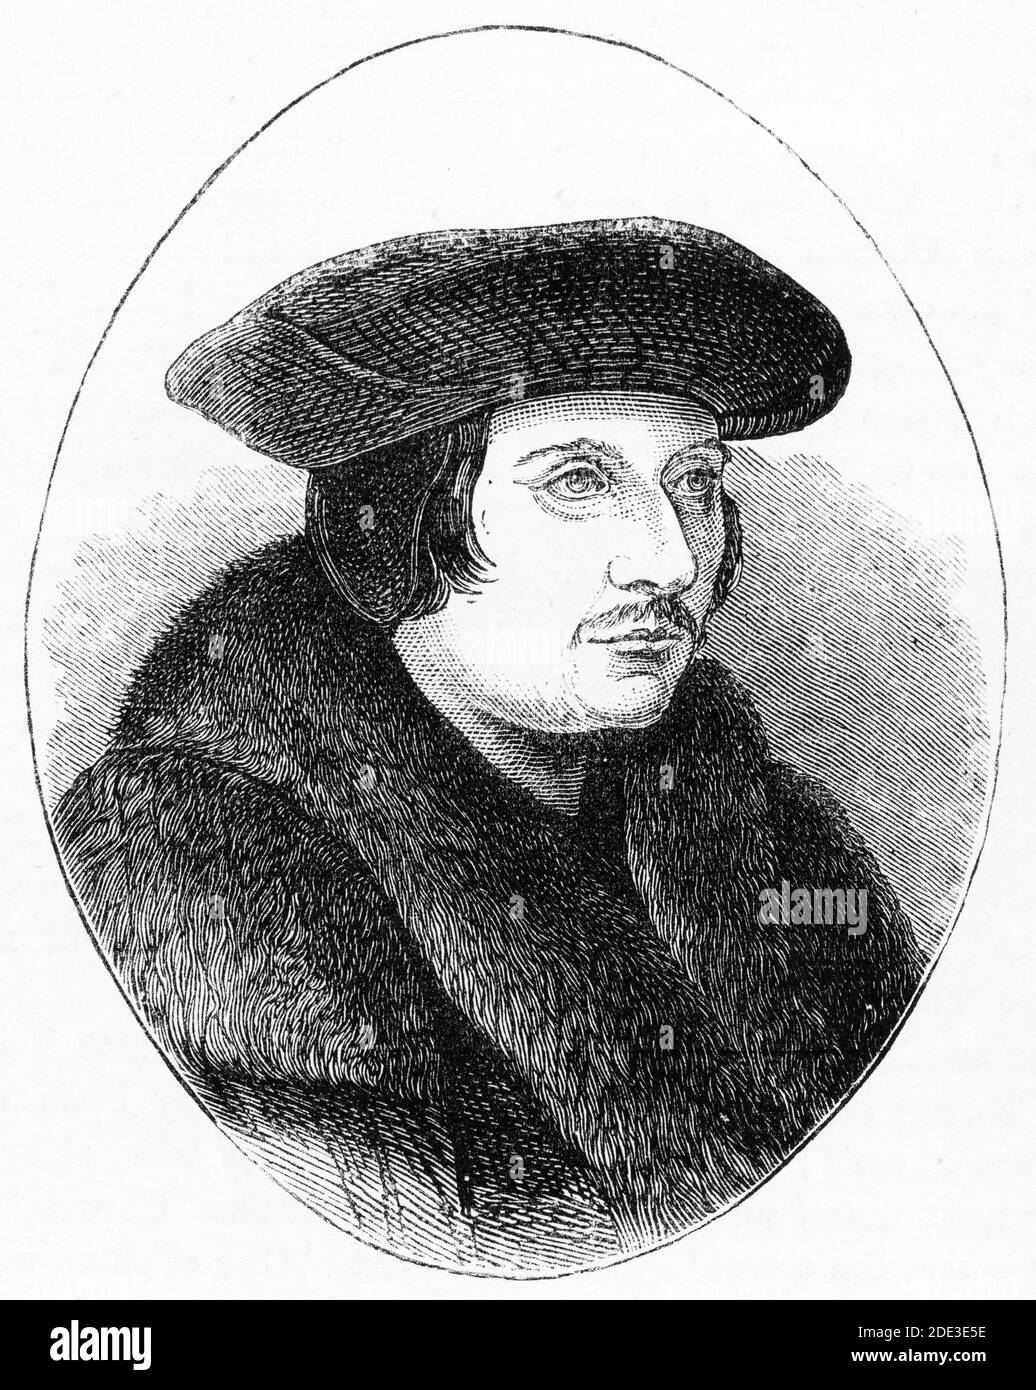 Engraving of  Sir Thomas More (1478 – 1535), venerated in the Catholic Church as Saint Thomas More, was an English lawyer, social philosopher, author, statesman, and noted Renaissance humanist. He also served Henry VIII as Lord High Chancellor of England from 1529 to May 1532.  Illustration from 'The history of Protestantism' by James Aitken Wylie (1808-1890), pub. 1878. Stock Photo